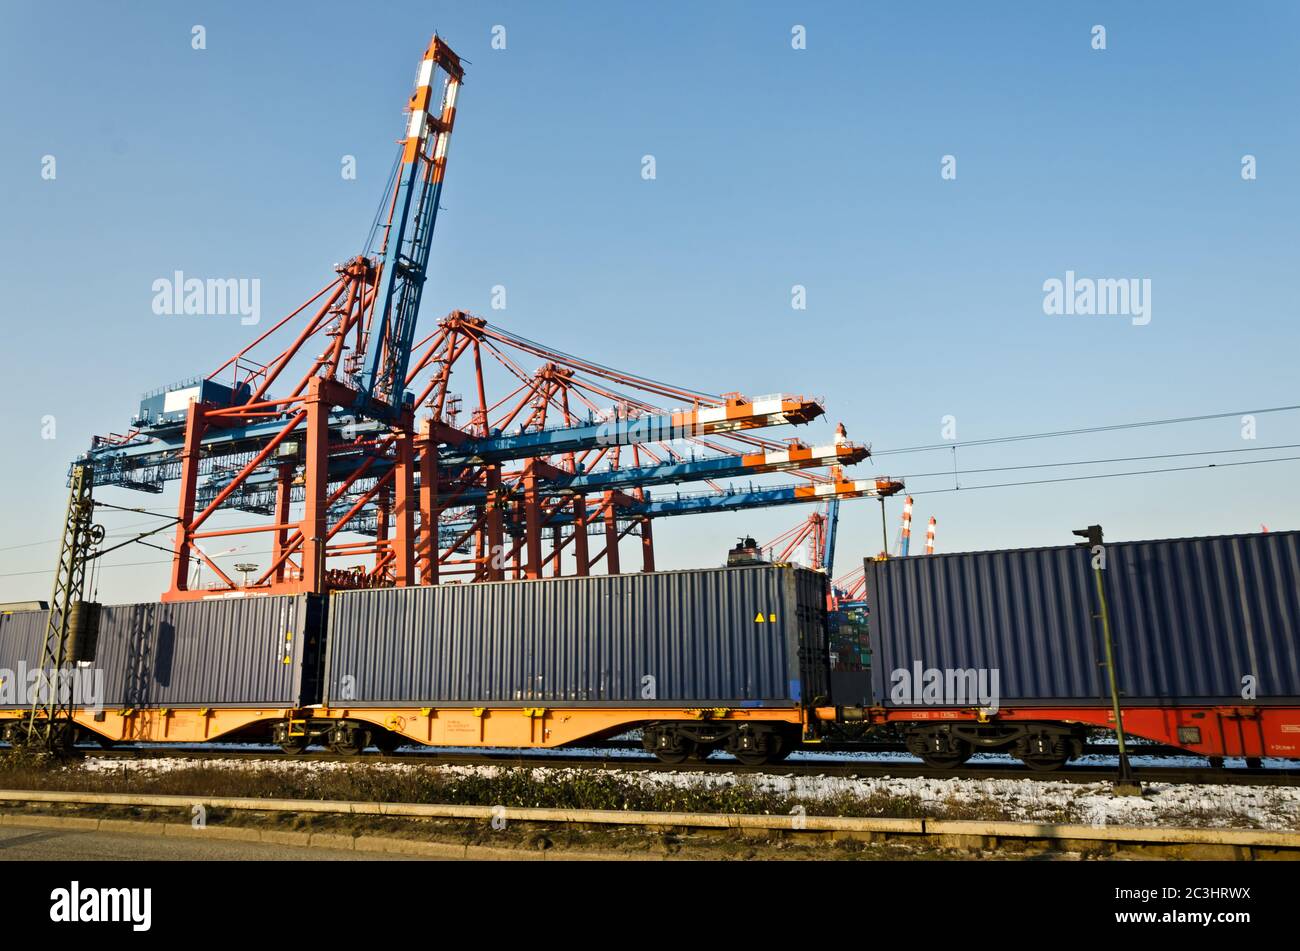 Freight train and harbour cranes Stock Photo